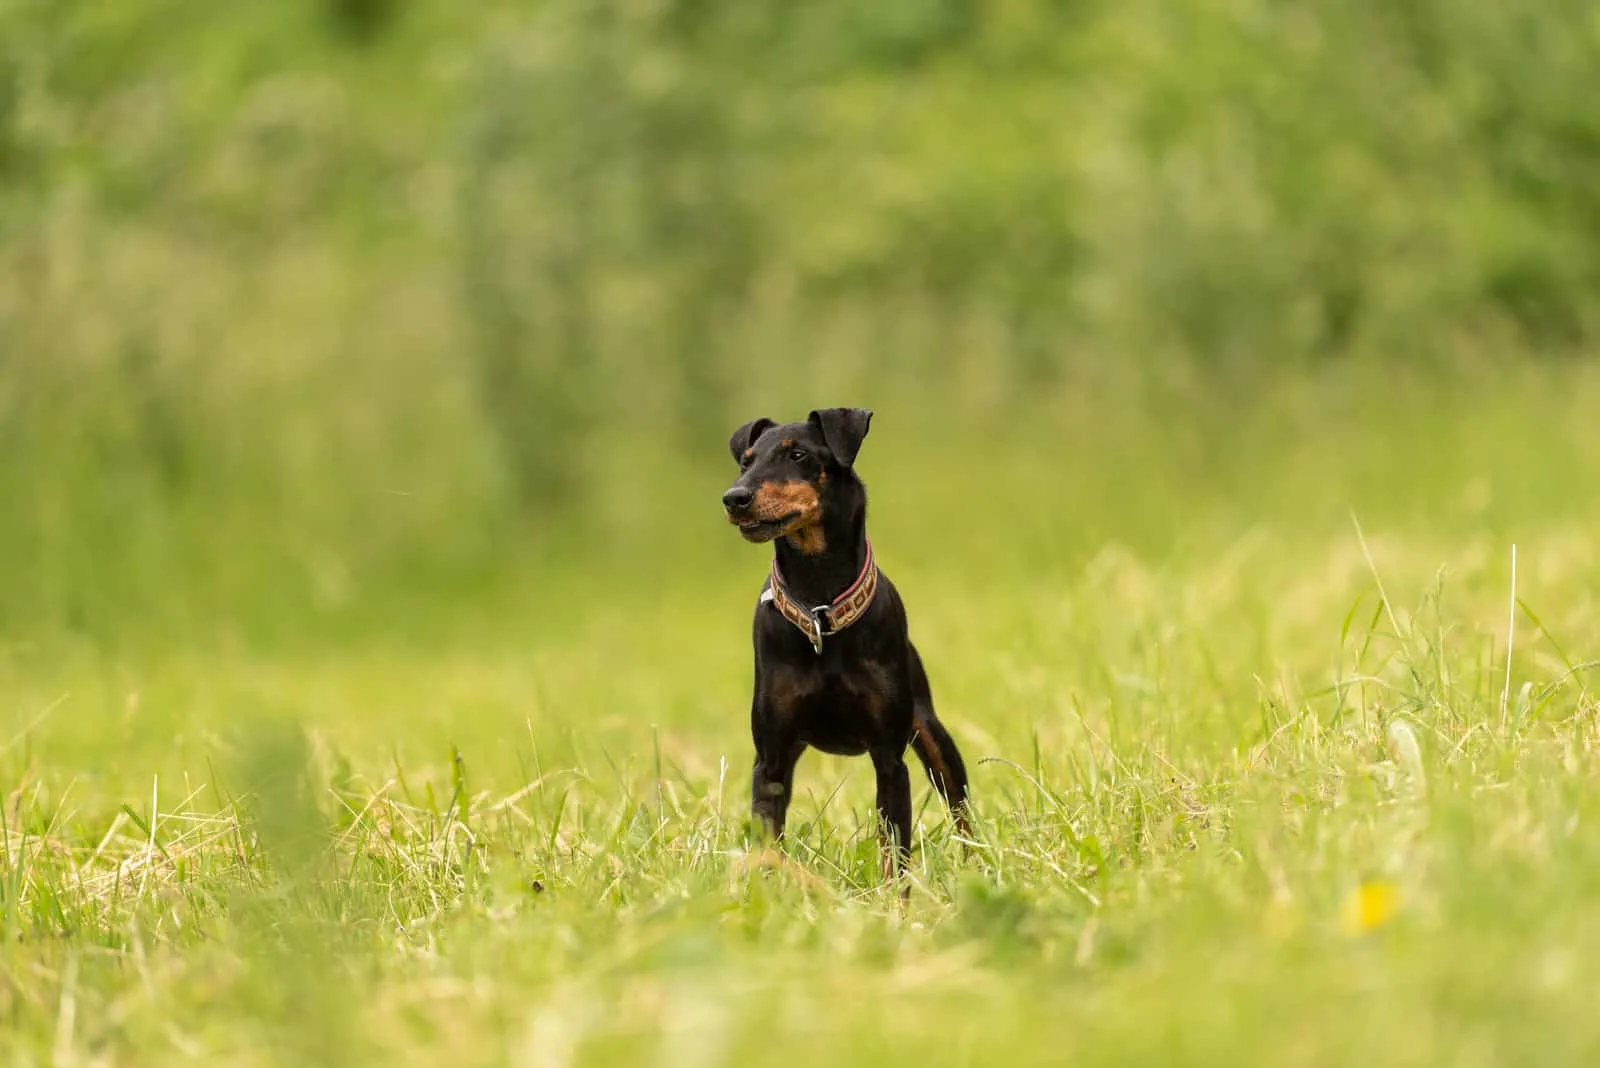 The Manchester Terrier stands on the green grass